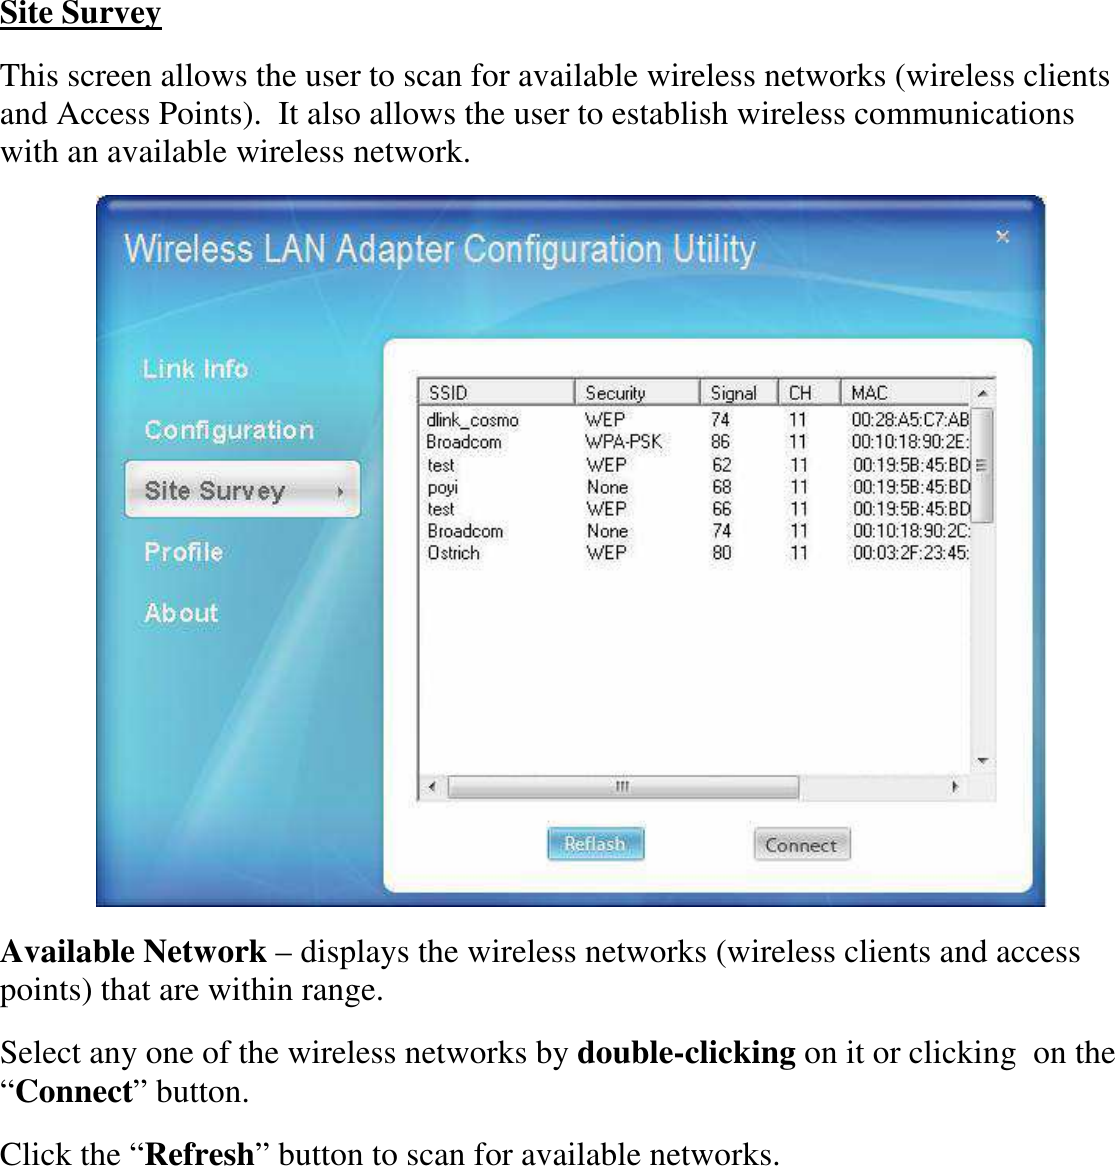  Site Survey This screen allows the user to scan for available wireless networks (wireless clients and Access Points).  It also allows the user to establish wireless communications with an available wireless network.  Available Network – displays the wireless networks (wireless clients and access points) that are within range.  Select any one of the wireless networks by double-clicking on it or clicking  on the “Connect” button. Click the “Refresh” button to scan for available networks. 